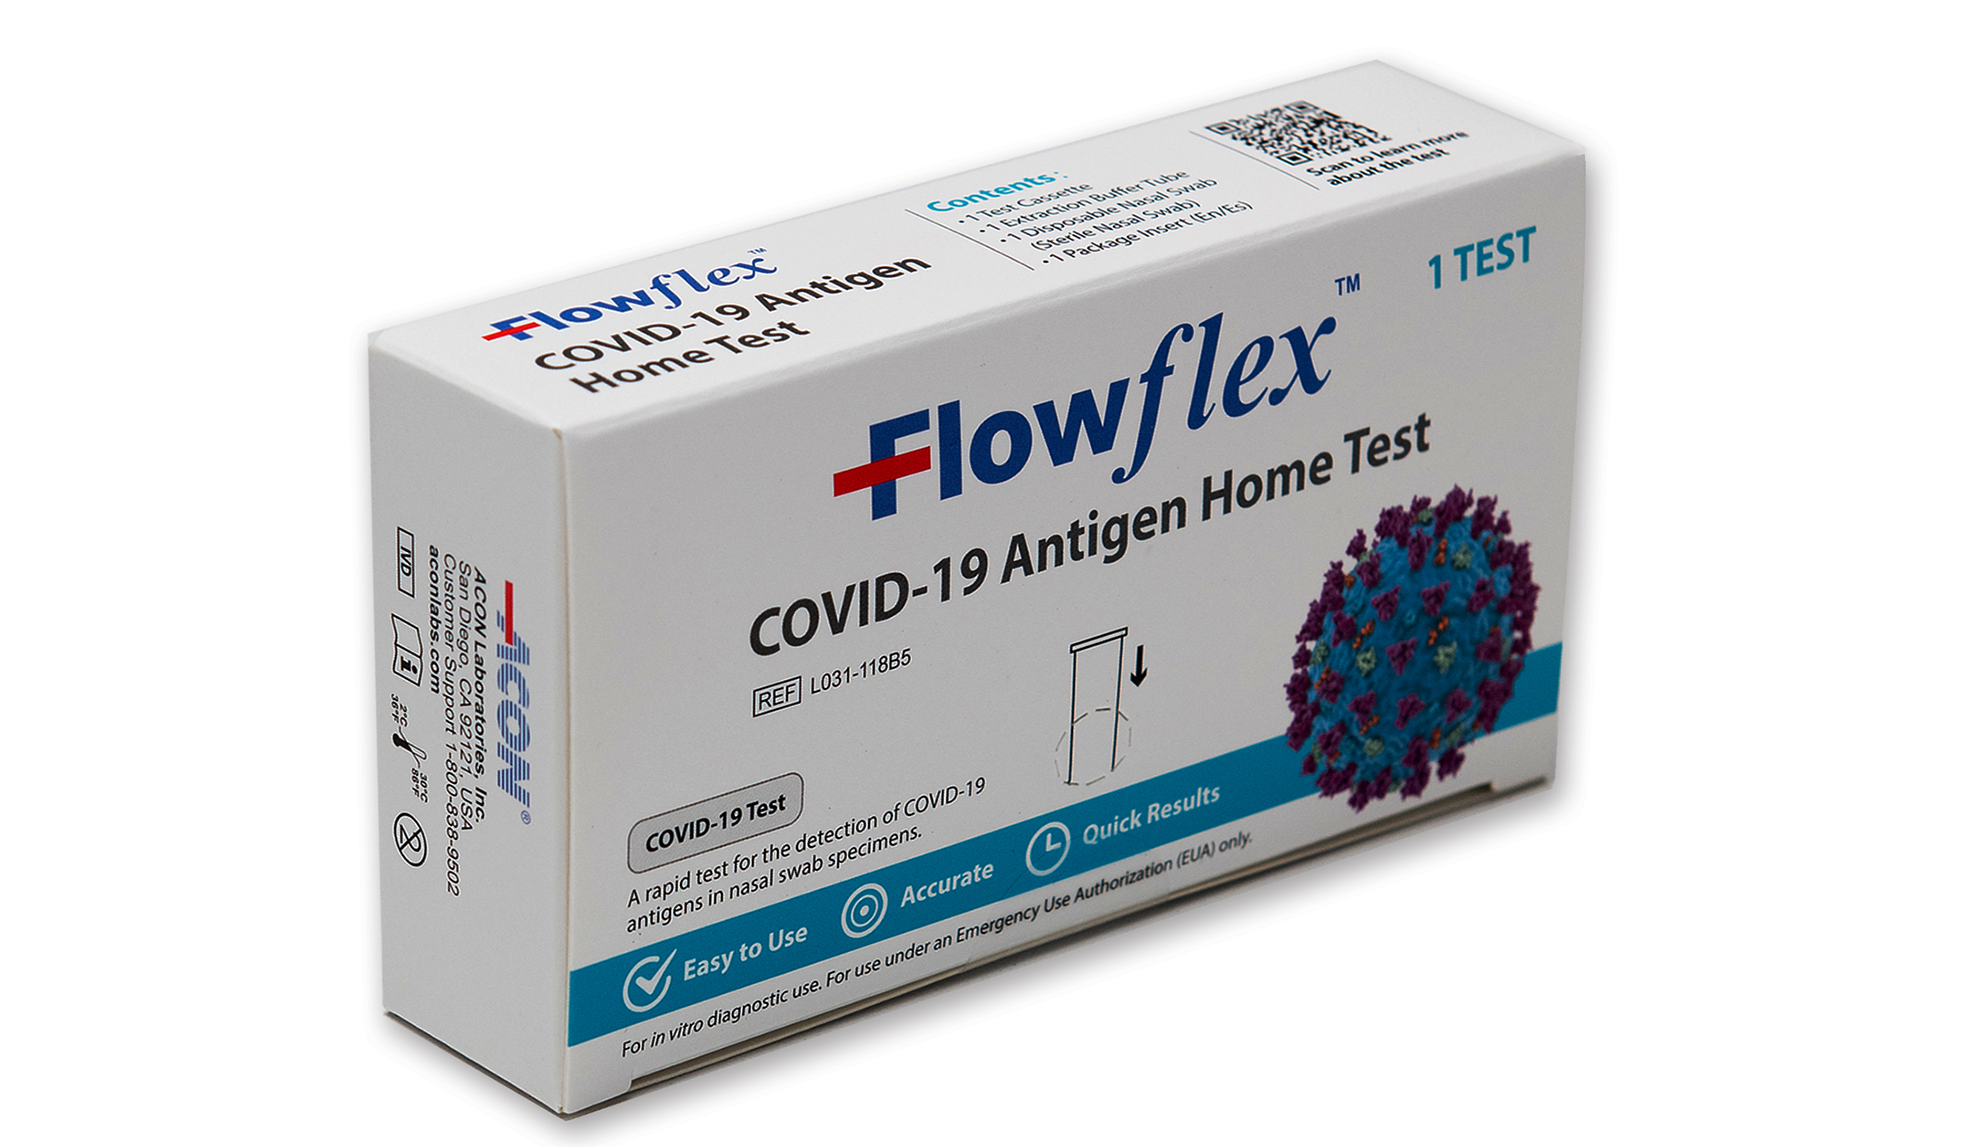 You can pick up free at-home COVID-19 test kits at every QPL location.